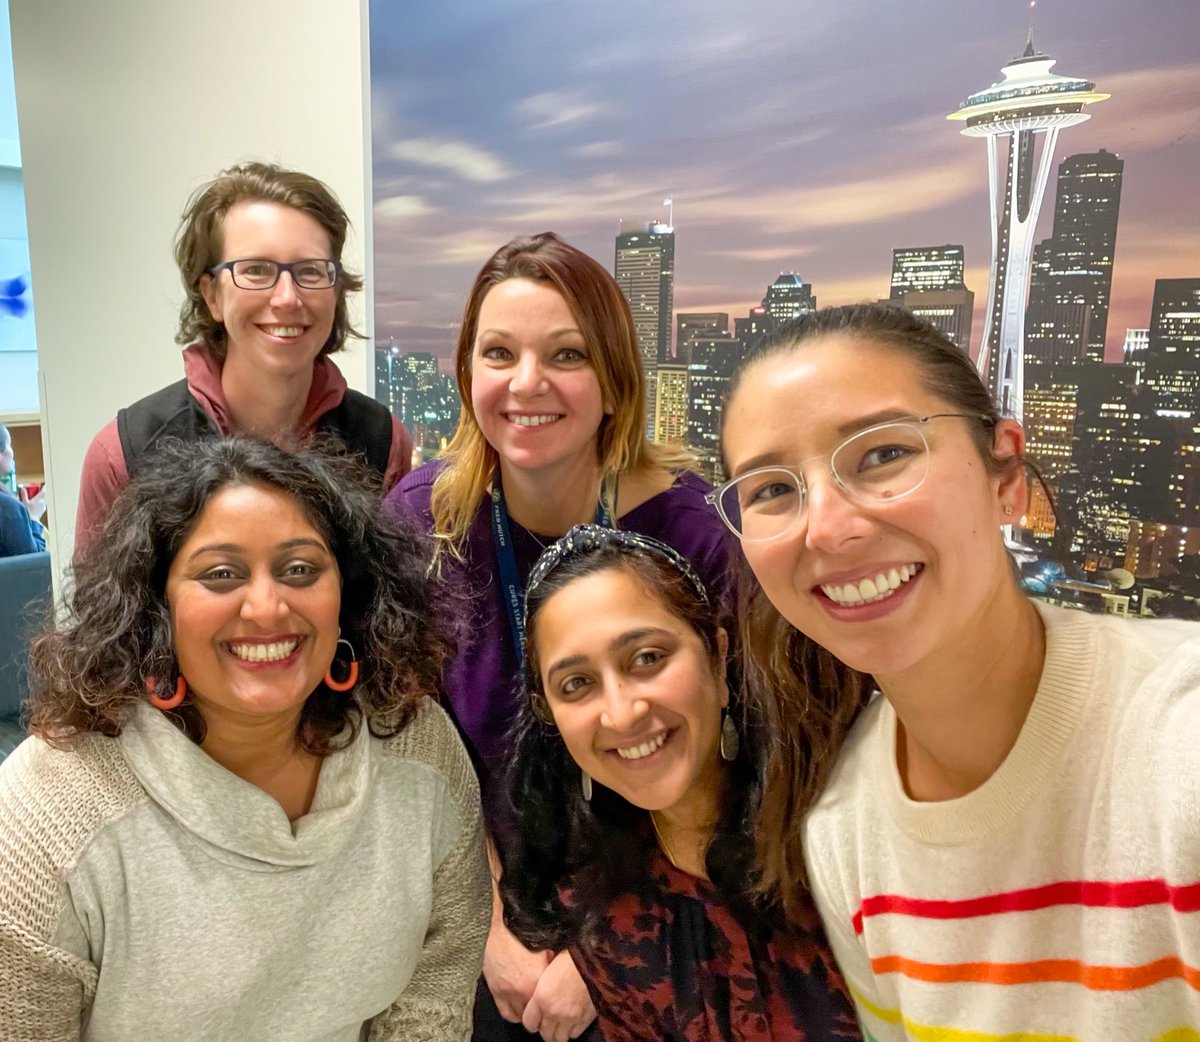 Just a few days left to apply for our faculty position @FredHutch! bit.ly/join-hutch If you’re hesitating (just do it) but also reach out to me or my brilliant jr PI colleagues with questions. The search committee considers pre-prints! #WomenInSTEM #FacultyJobs #SquadGoals